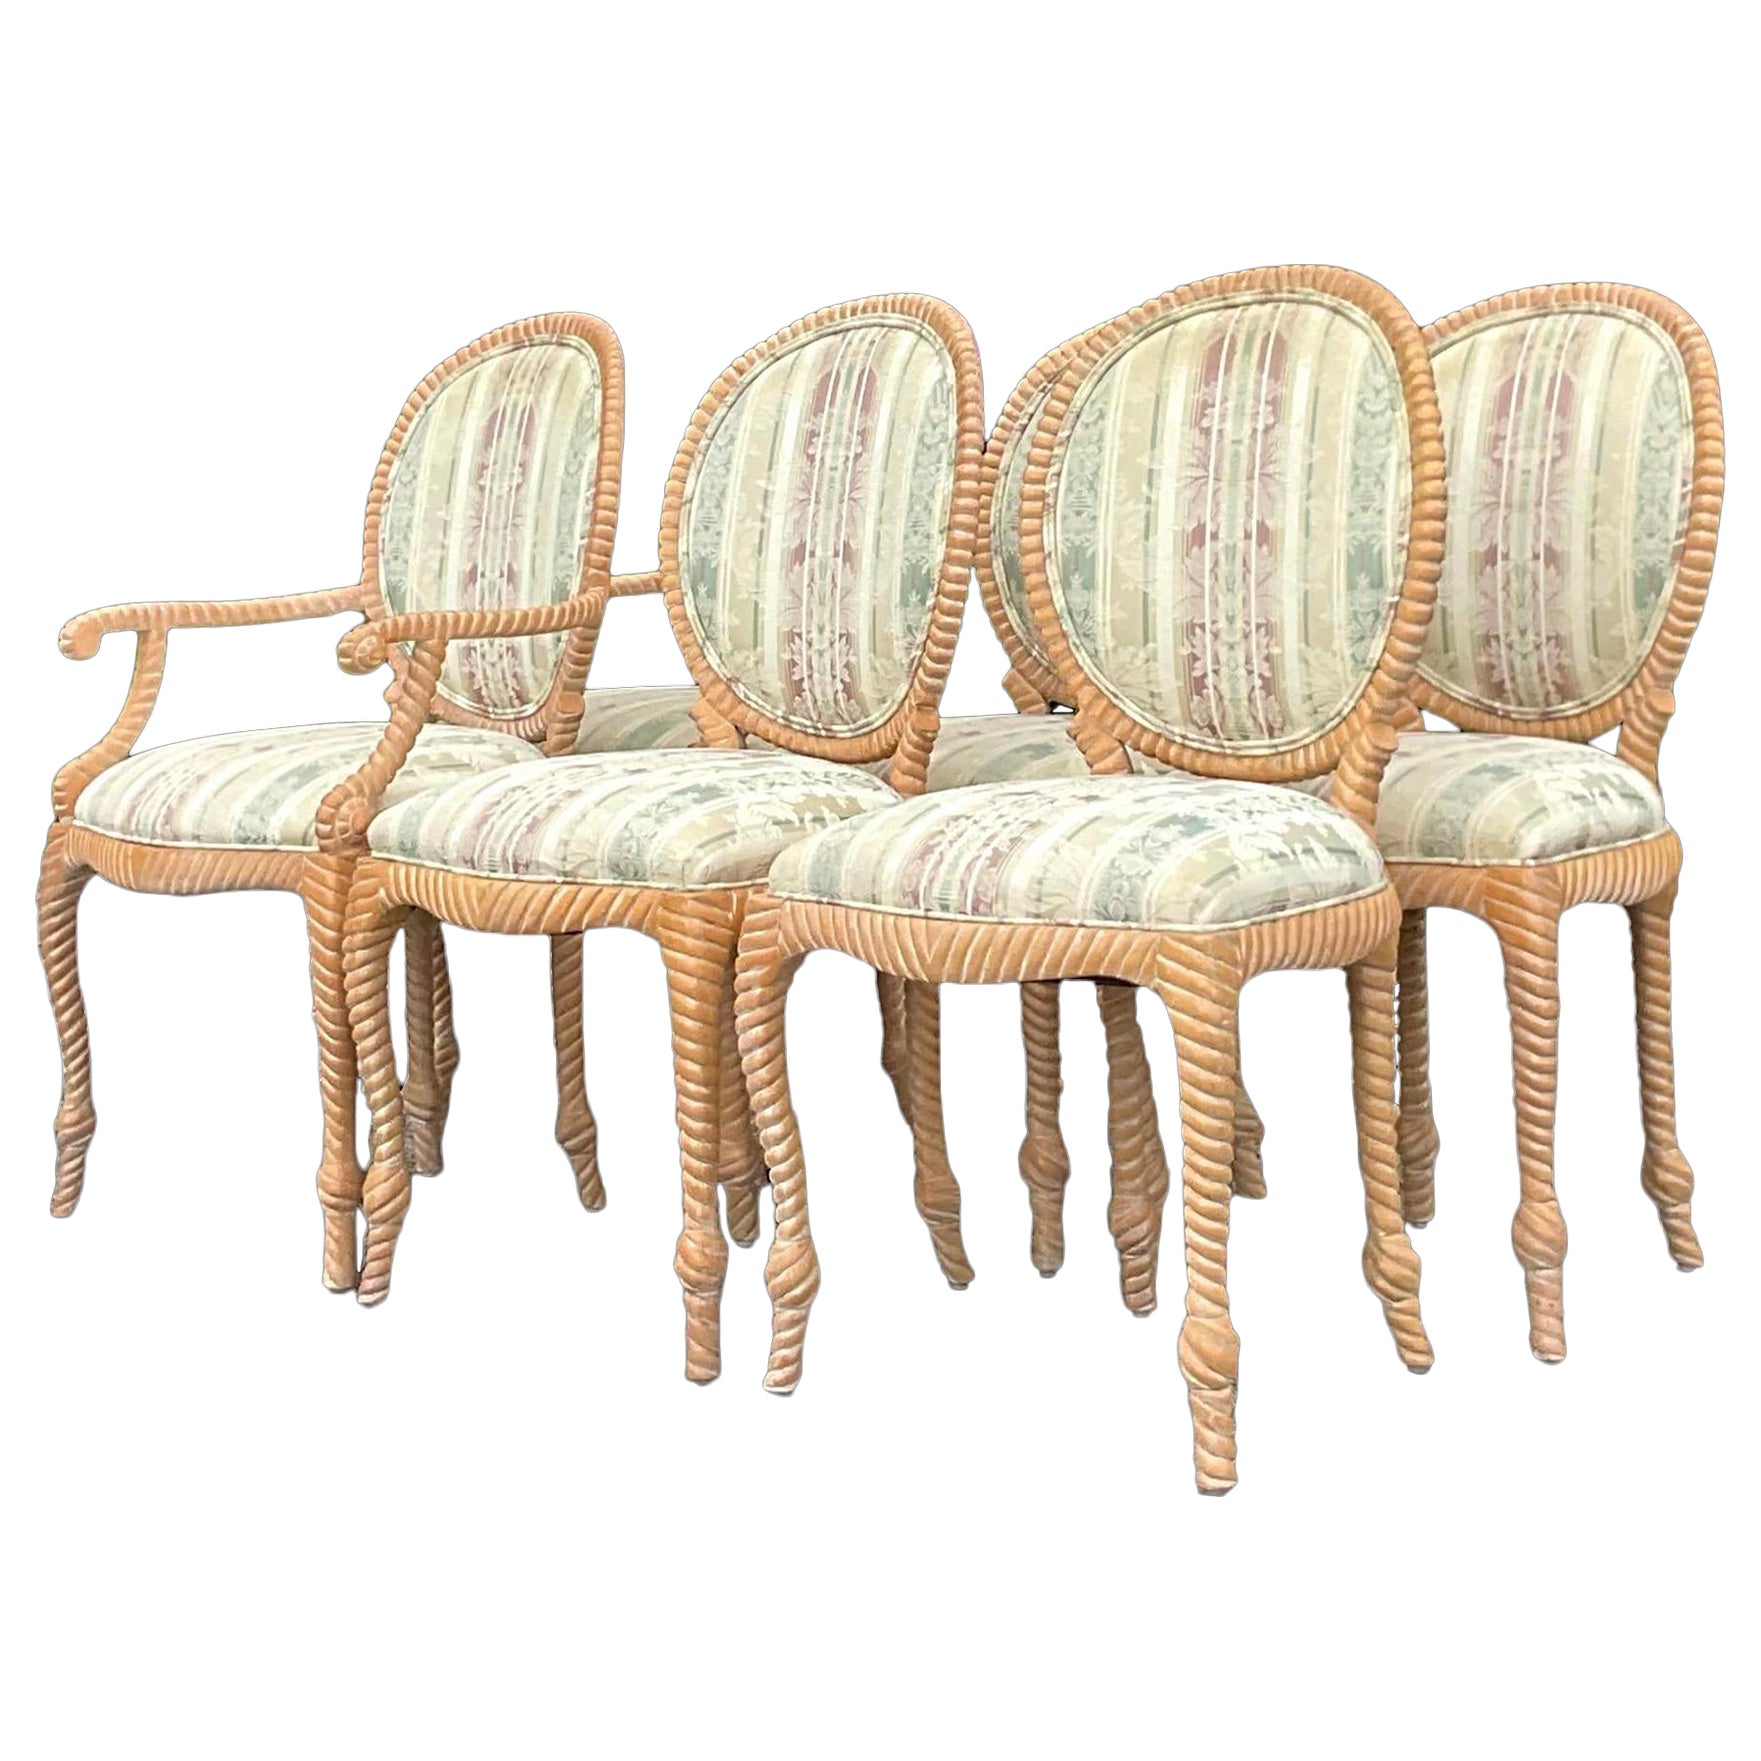 Vintage Boho Spanish Carved Rope Dining Chairs - Set of 6 For Sale